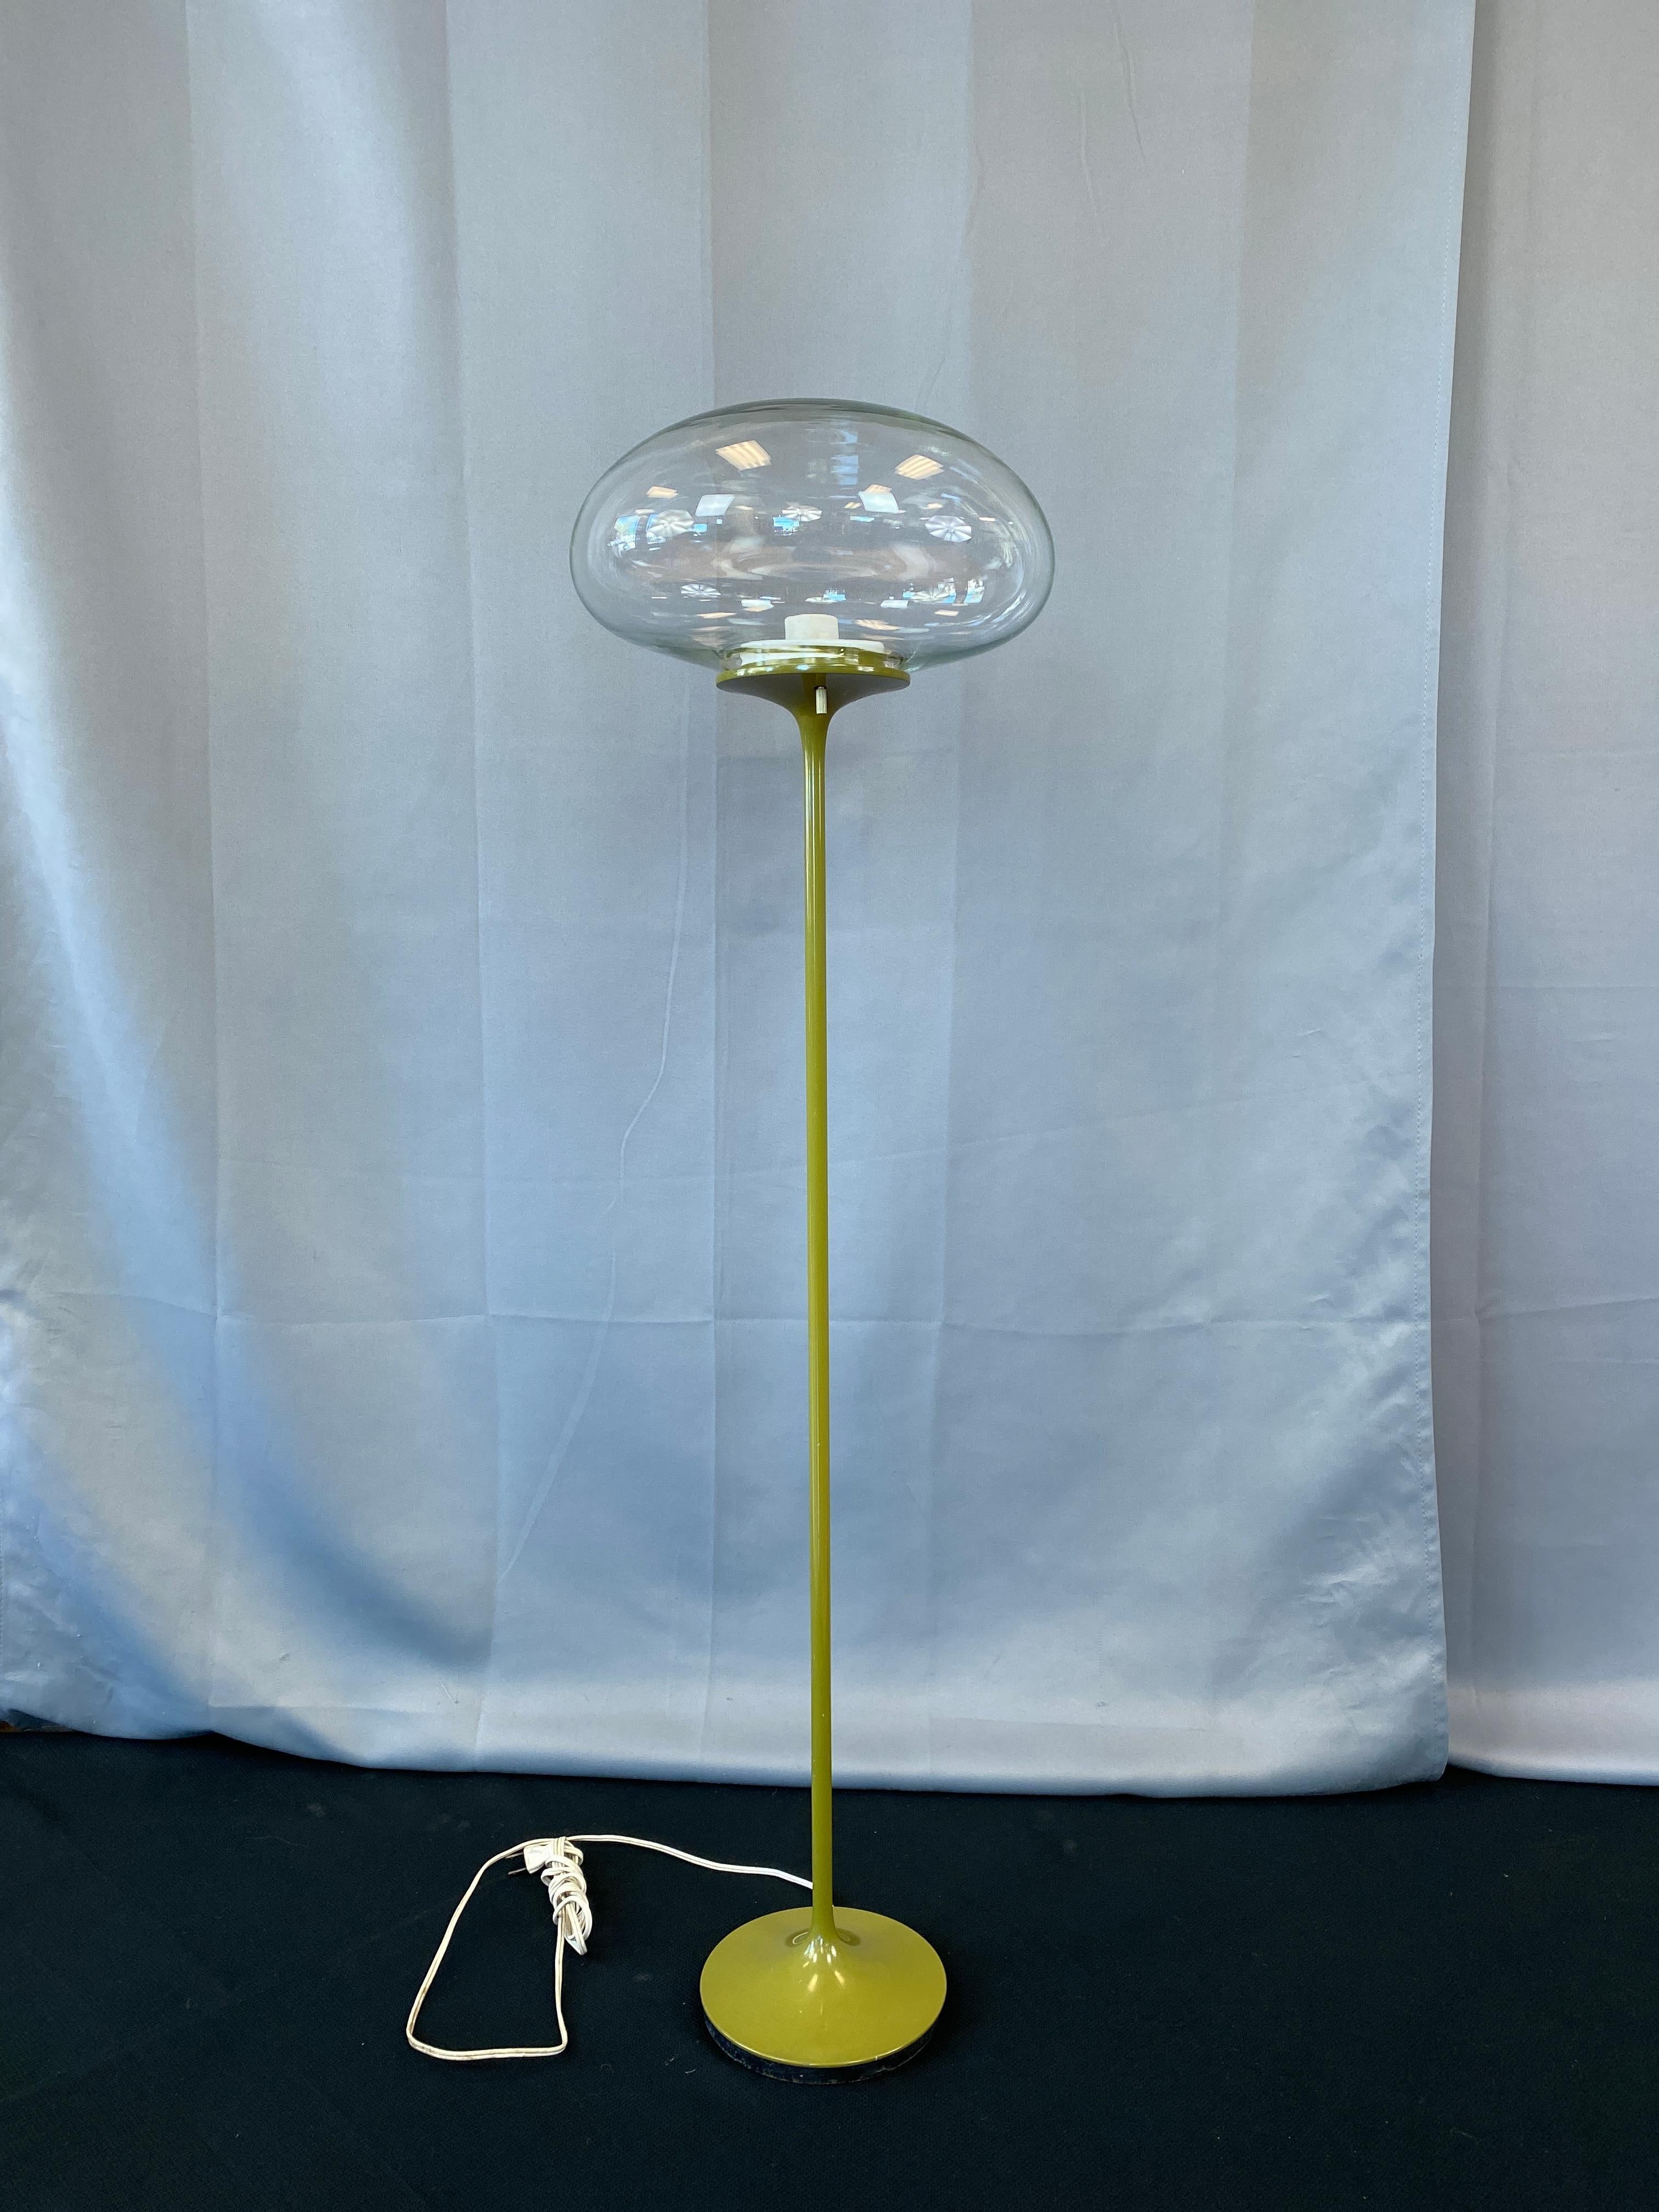 Floor lamp in Classic Avocado green, a Stemlite floor lamp by Bill Curry for Design Line, circa 1970s.
Round weighted base holds the long and slender stem, which in turns holds the clear glass orb shade.

Lamp is 43 1/2 inches tall, shade 12 1/2